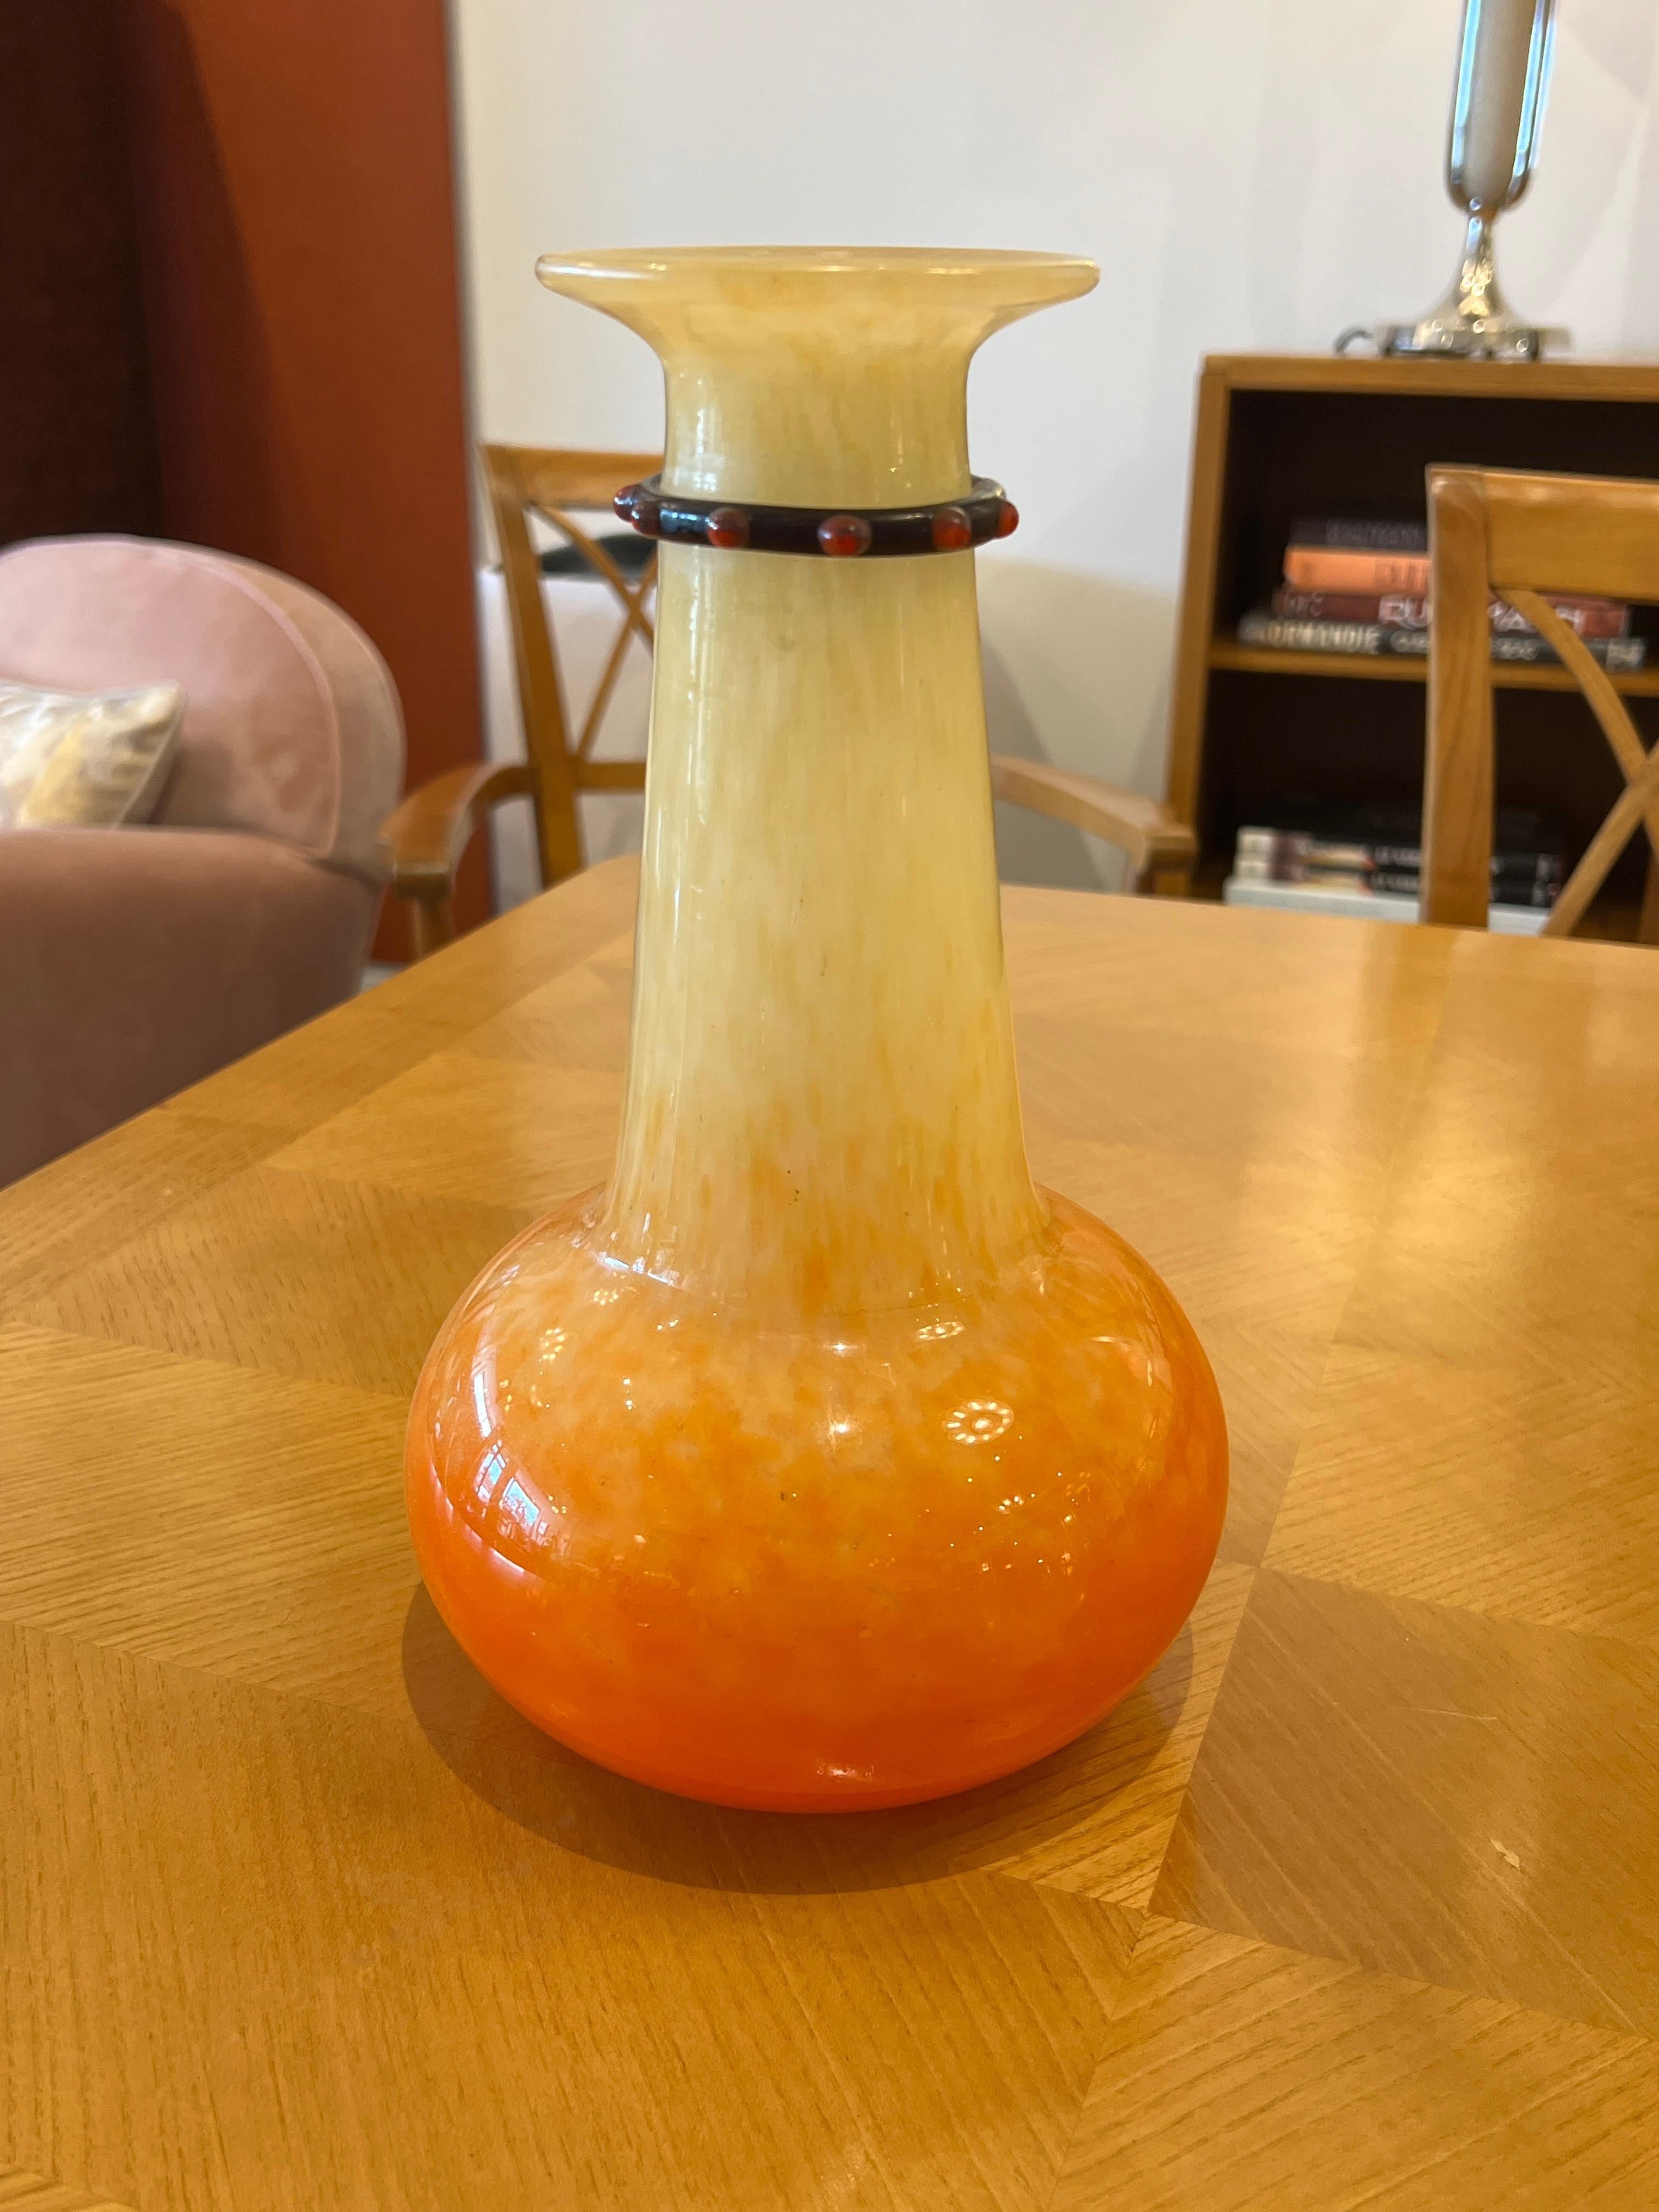 A French Art Deco glass vase by Charles Schneider in orange and yellow hues with a glass application around the neck.
Signature: Schneider-France
Charles Schneider was a renowned glassmaker during the Art Deco period in France. He was known for his